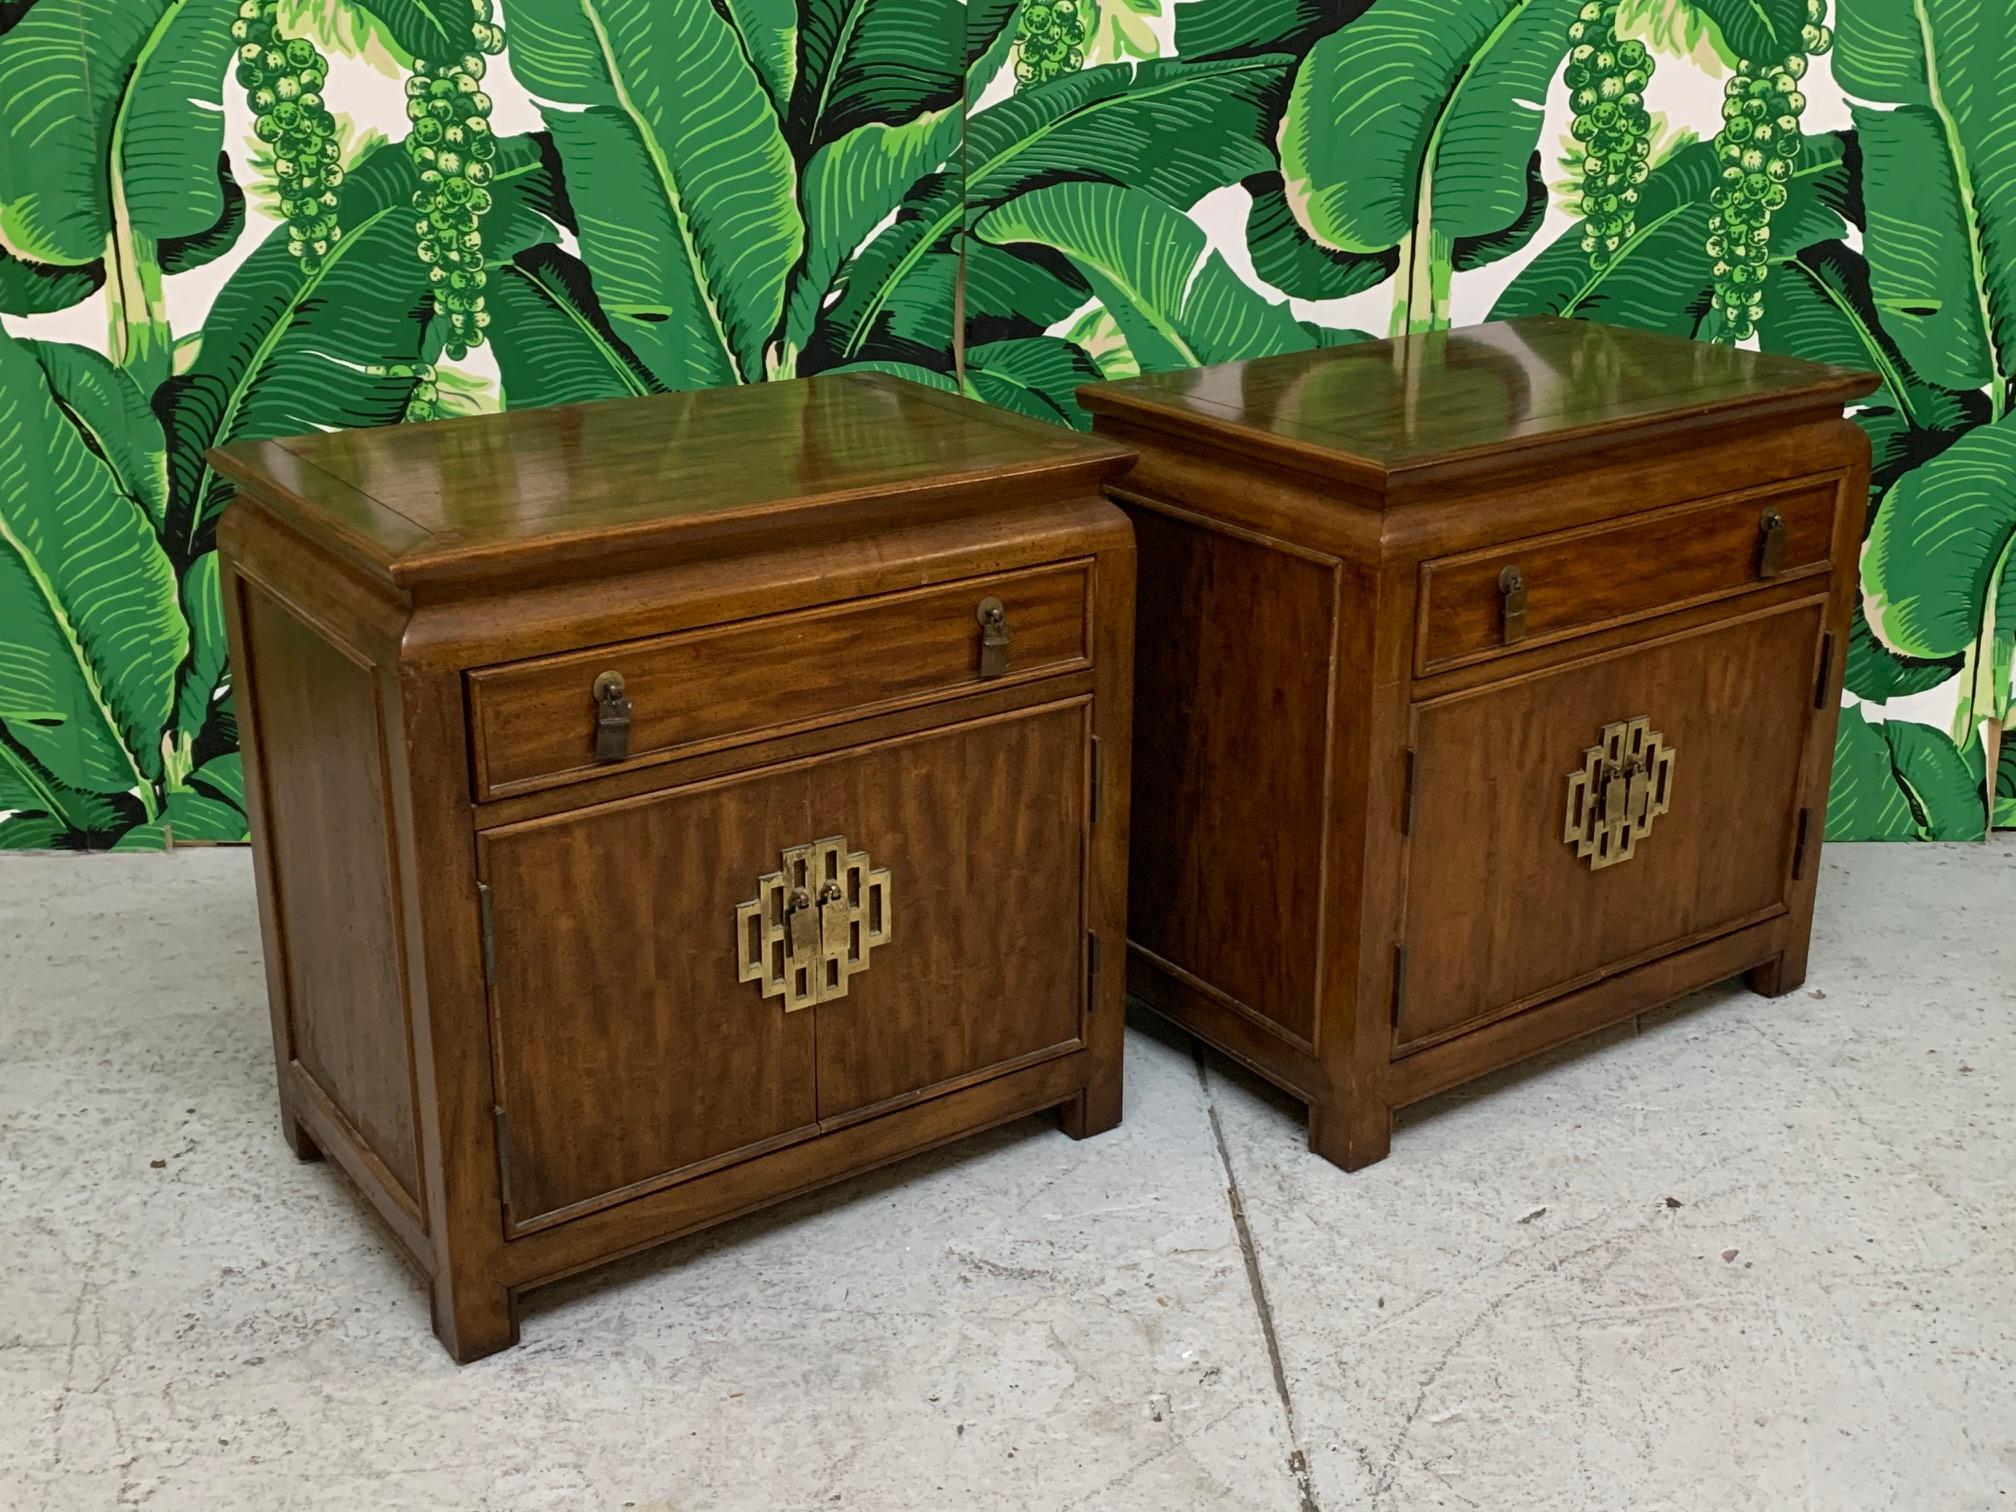 Pair of Asian chinoiserie nightstands by Raymond Sobota for the Century Furniture Chin Hua collection. Asian styling and heavy brass hardware. Very good condition with minor imperfections consistent with age, including marks on surface from pads